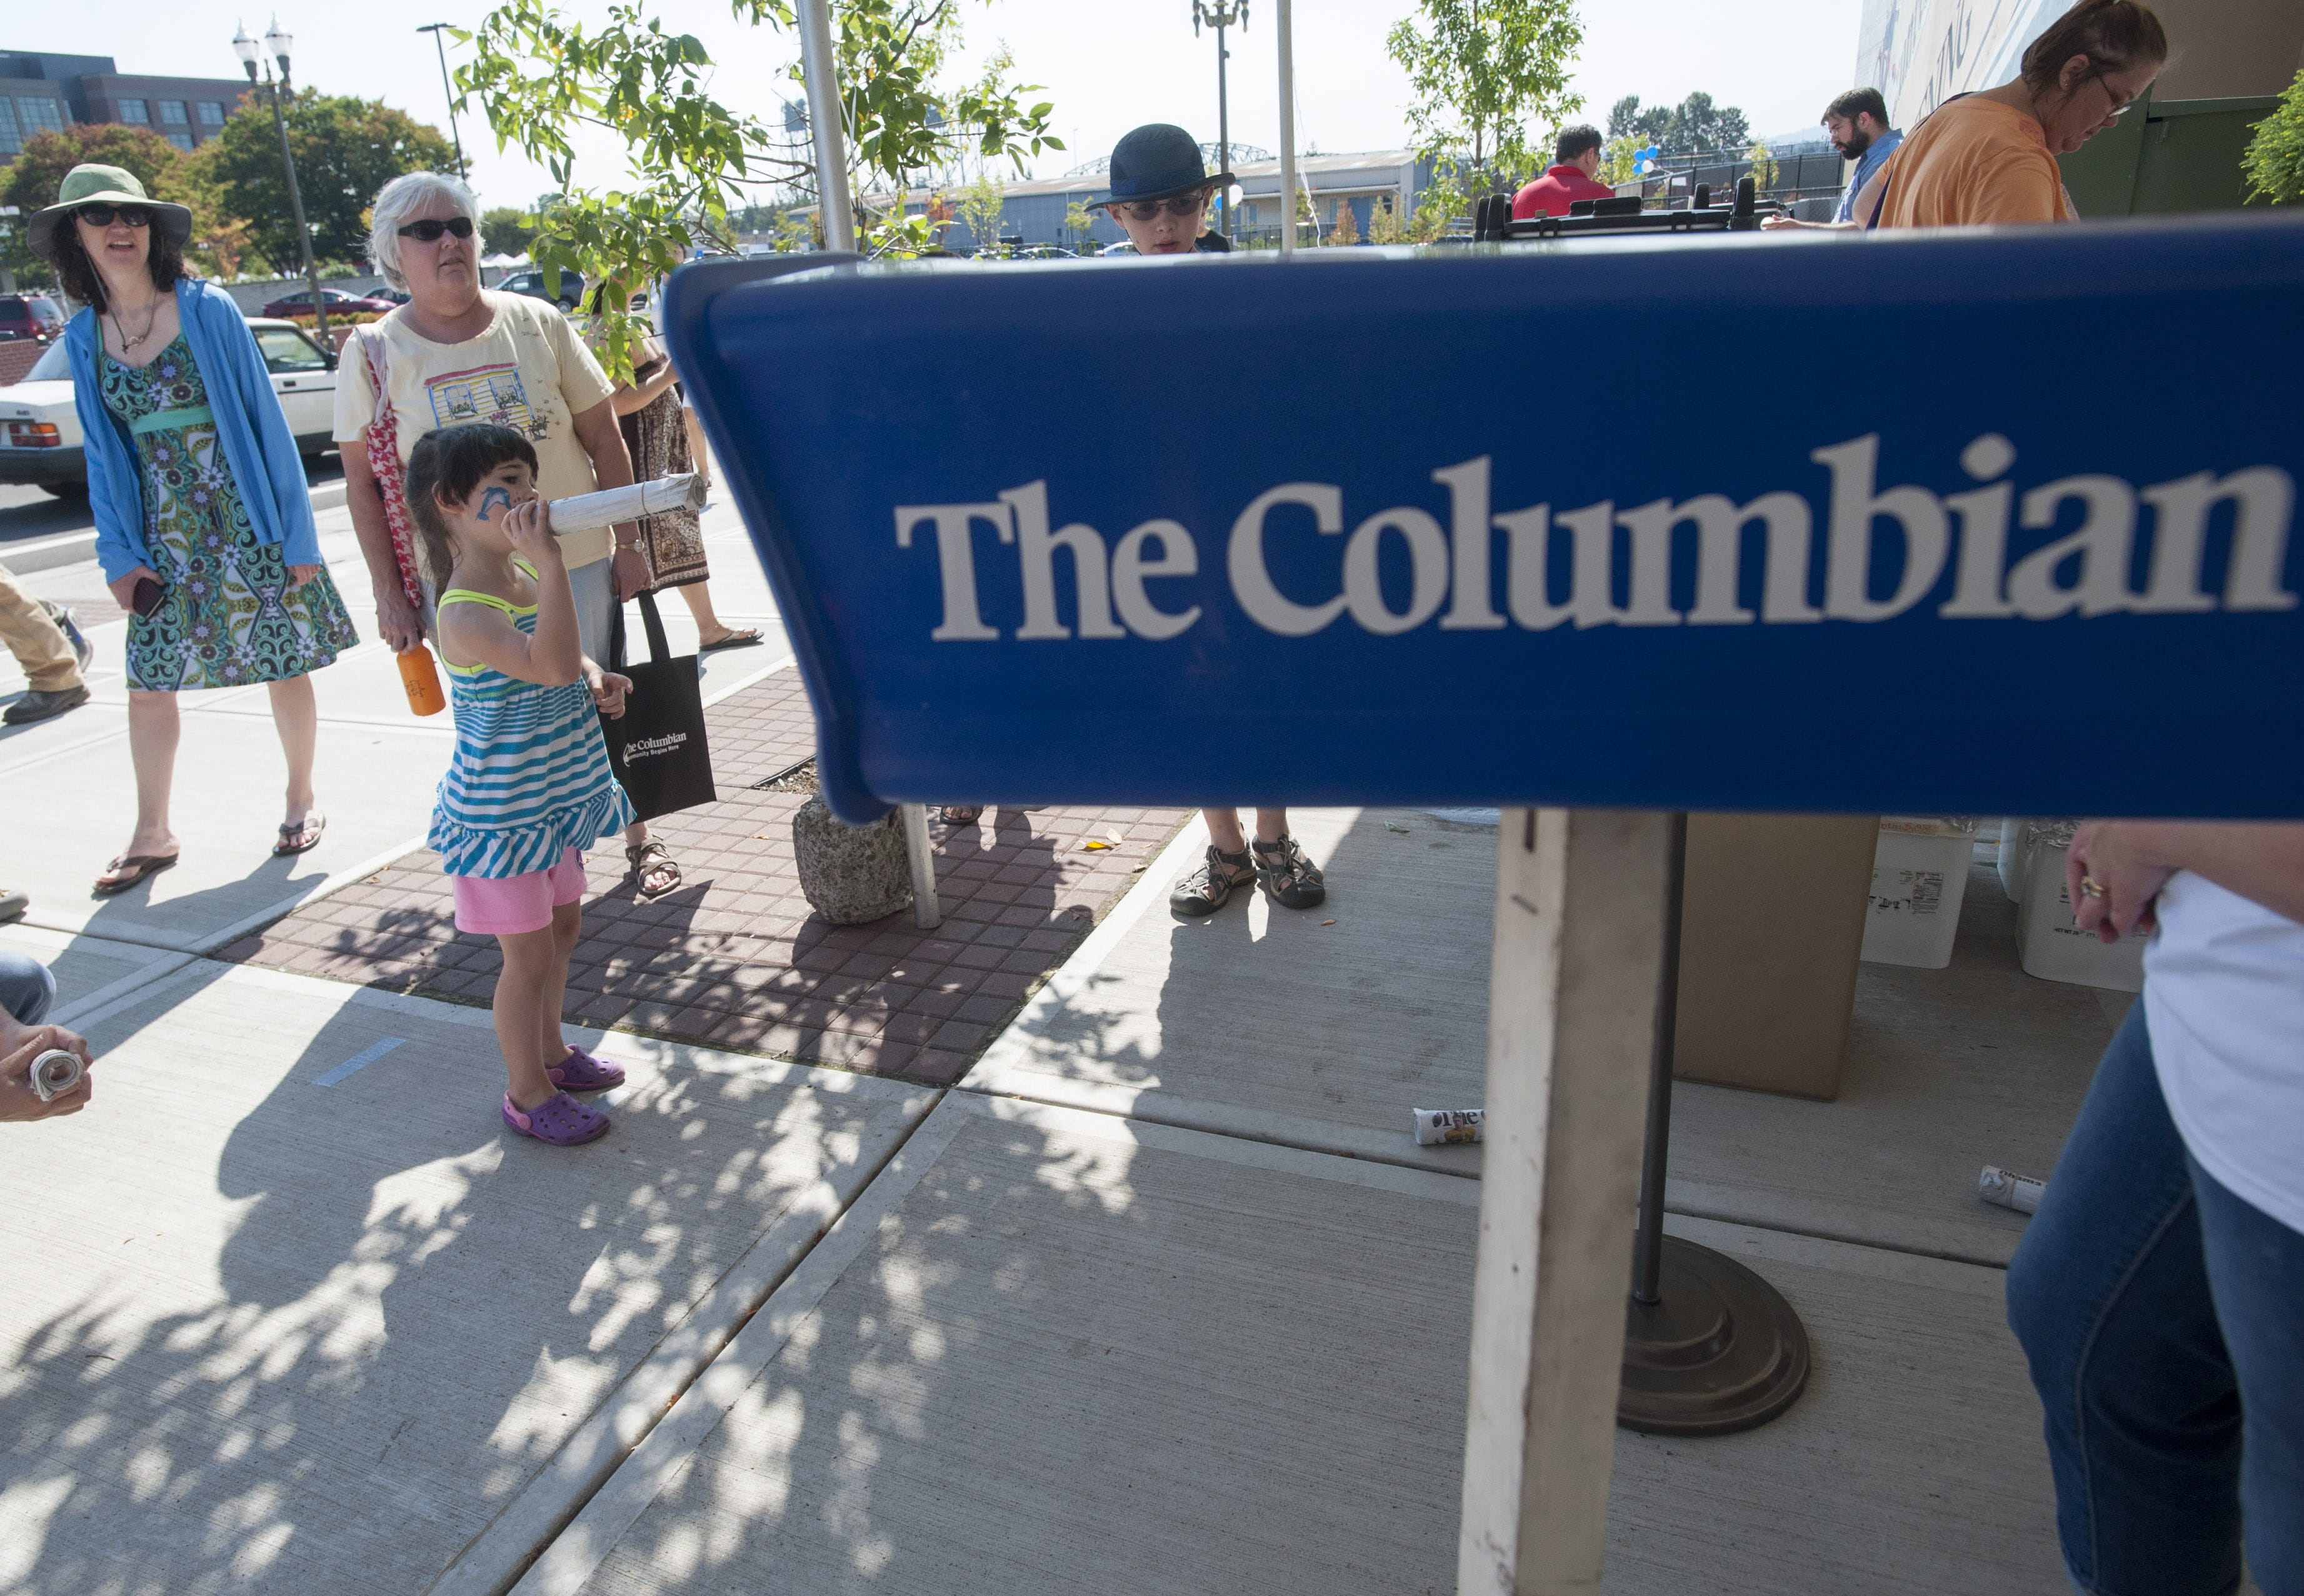 Bailey Rose played a game of throwing a paper in to a plastic receptacle at an event at The Columbian in Vancouver on Sept. 12. The event was held in advance of The Columbian newspaper's 125th anniversary in October. The Columbian announced layoffs on Wednesday.